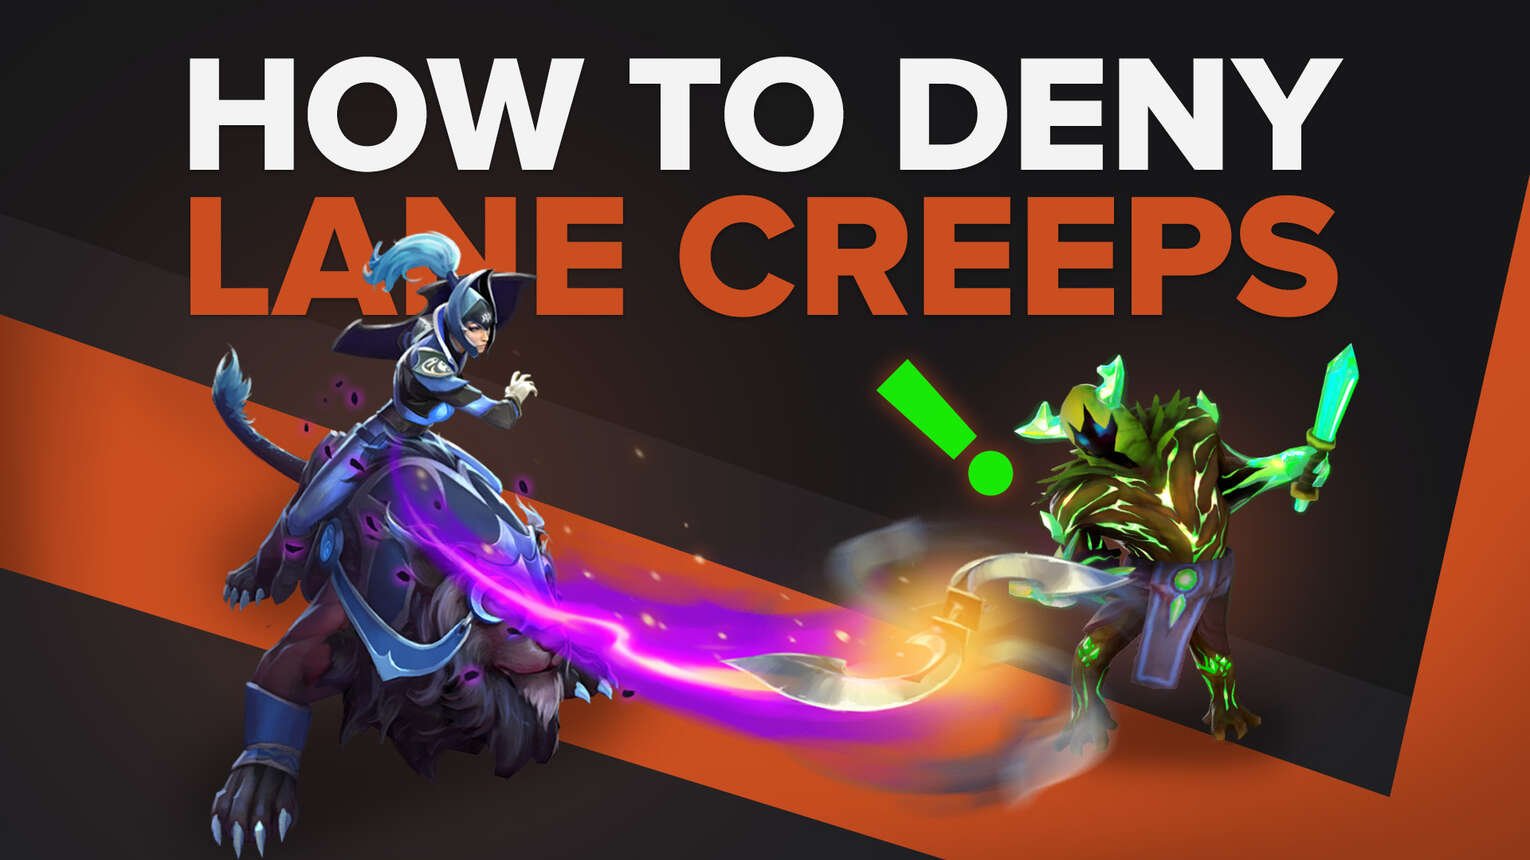 Denying in Dota 2 Will Gain You MMR, Here's Why (How to Deny Lane Creeps)